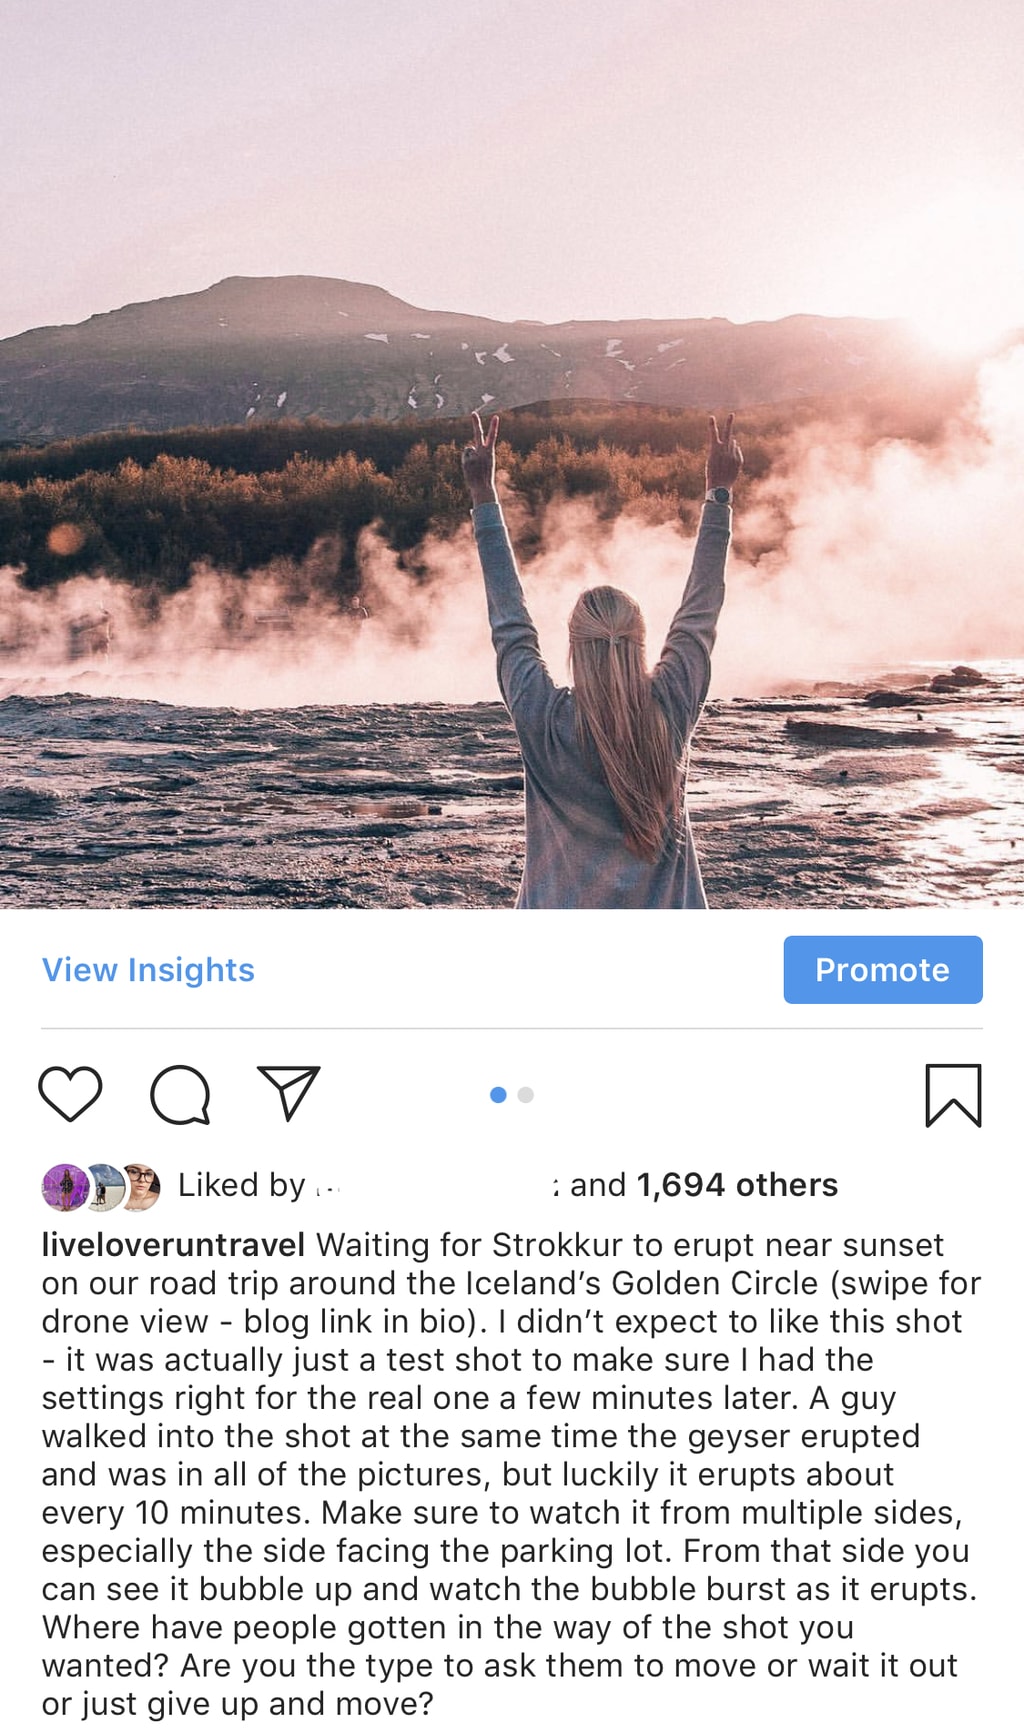 Instagram carousels allow you to post more than one video or image at a time like this one that includes a photo and a video. If you've ever had trouble getting one to post, this might be the reason why (and it's a quick fix!). Plus, don't miss the other tips for posting carousels on Instagram and getting good engagement on them.